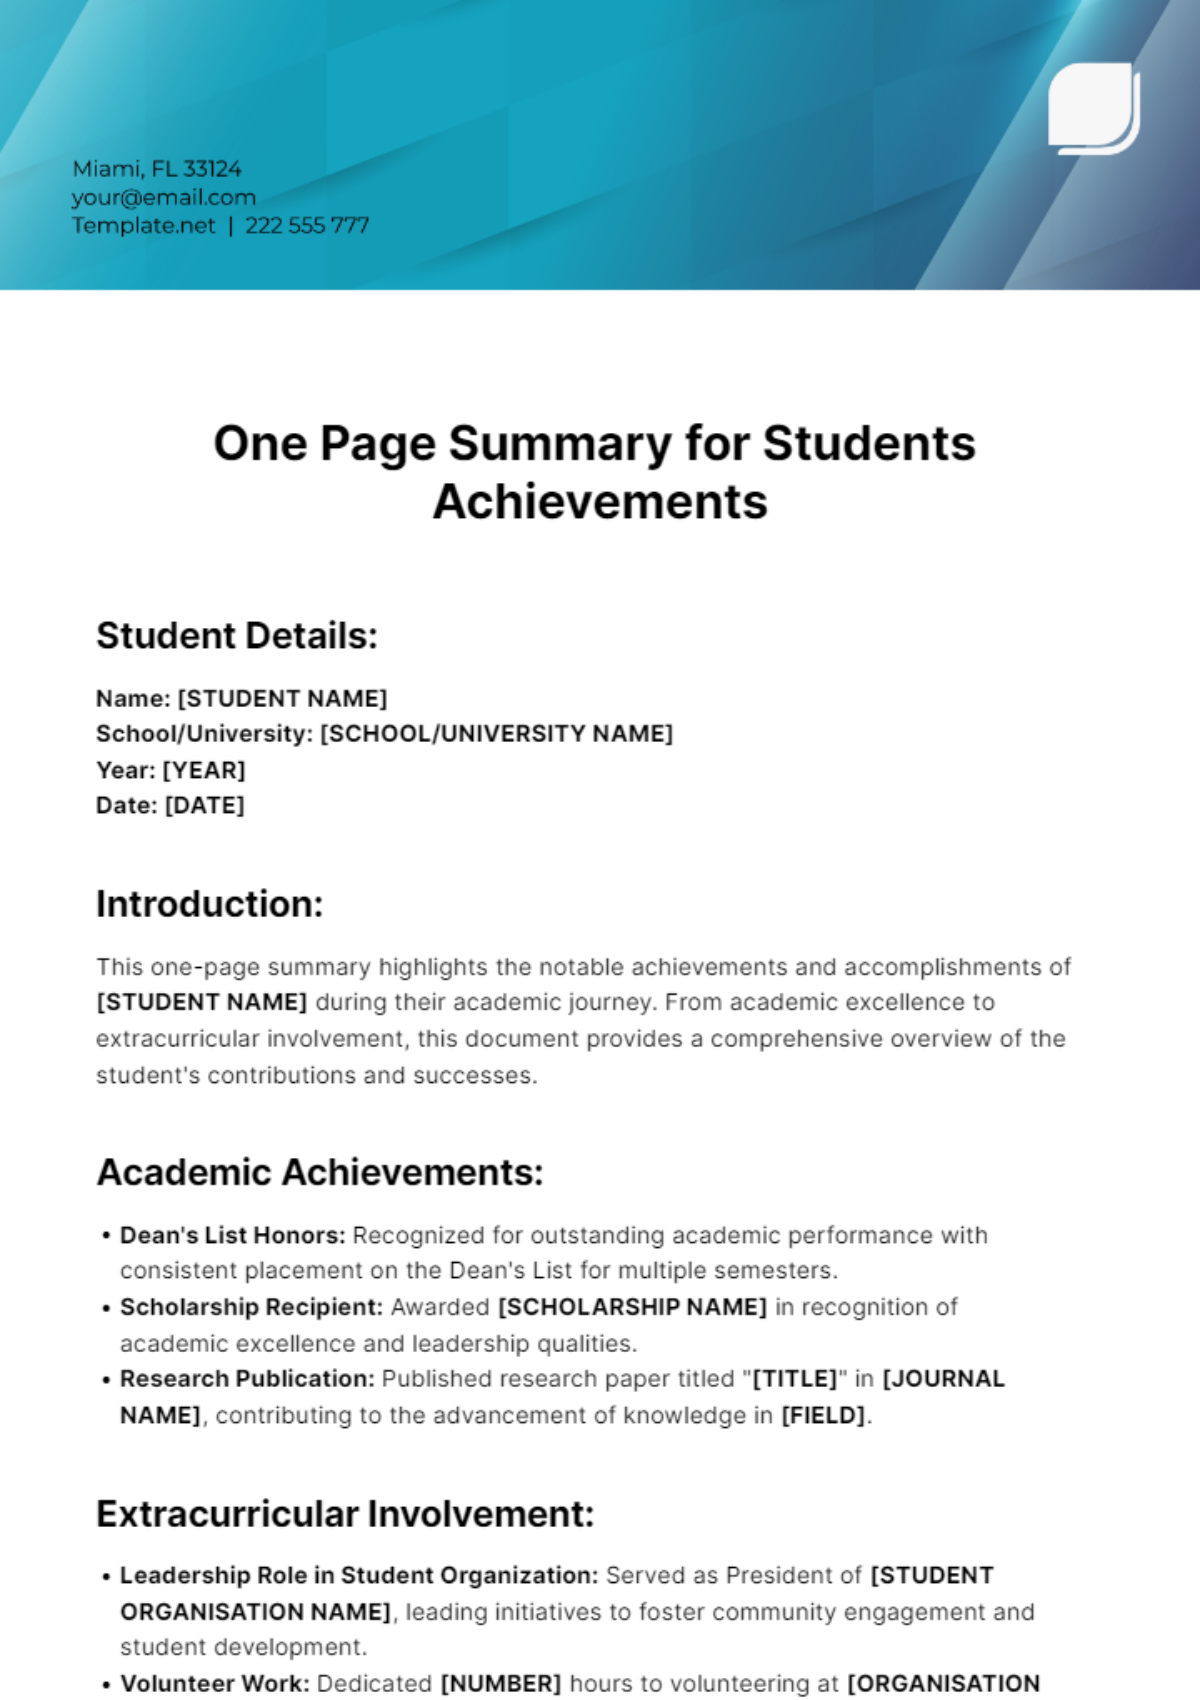 One Page Summary For Students Achievements Template